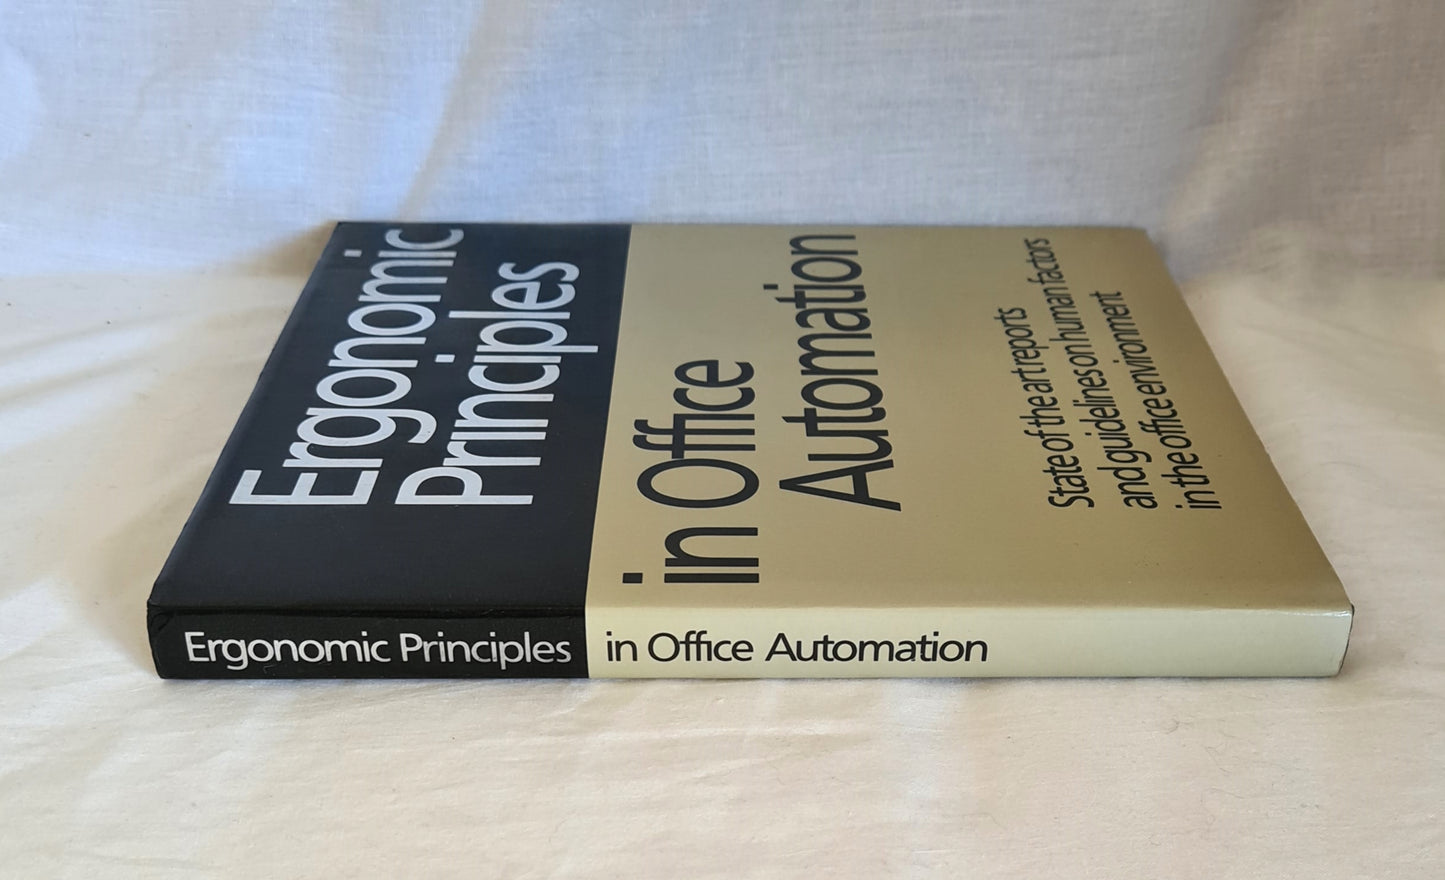 Ergonomic Principles in Office Automation